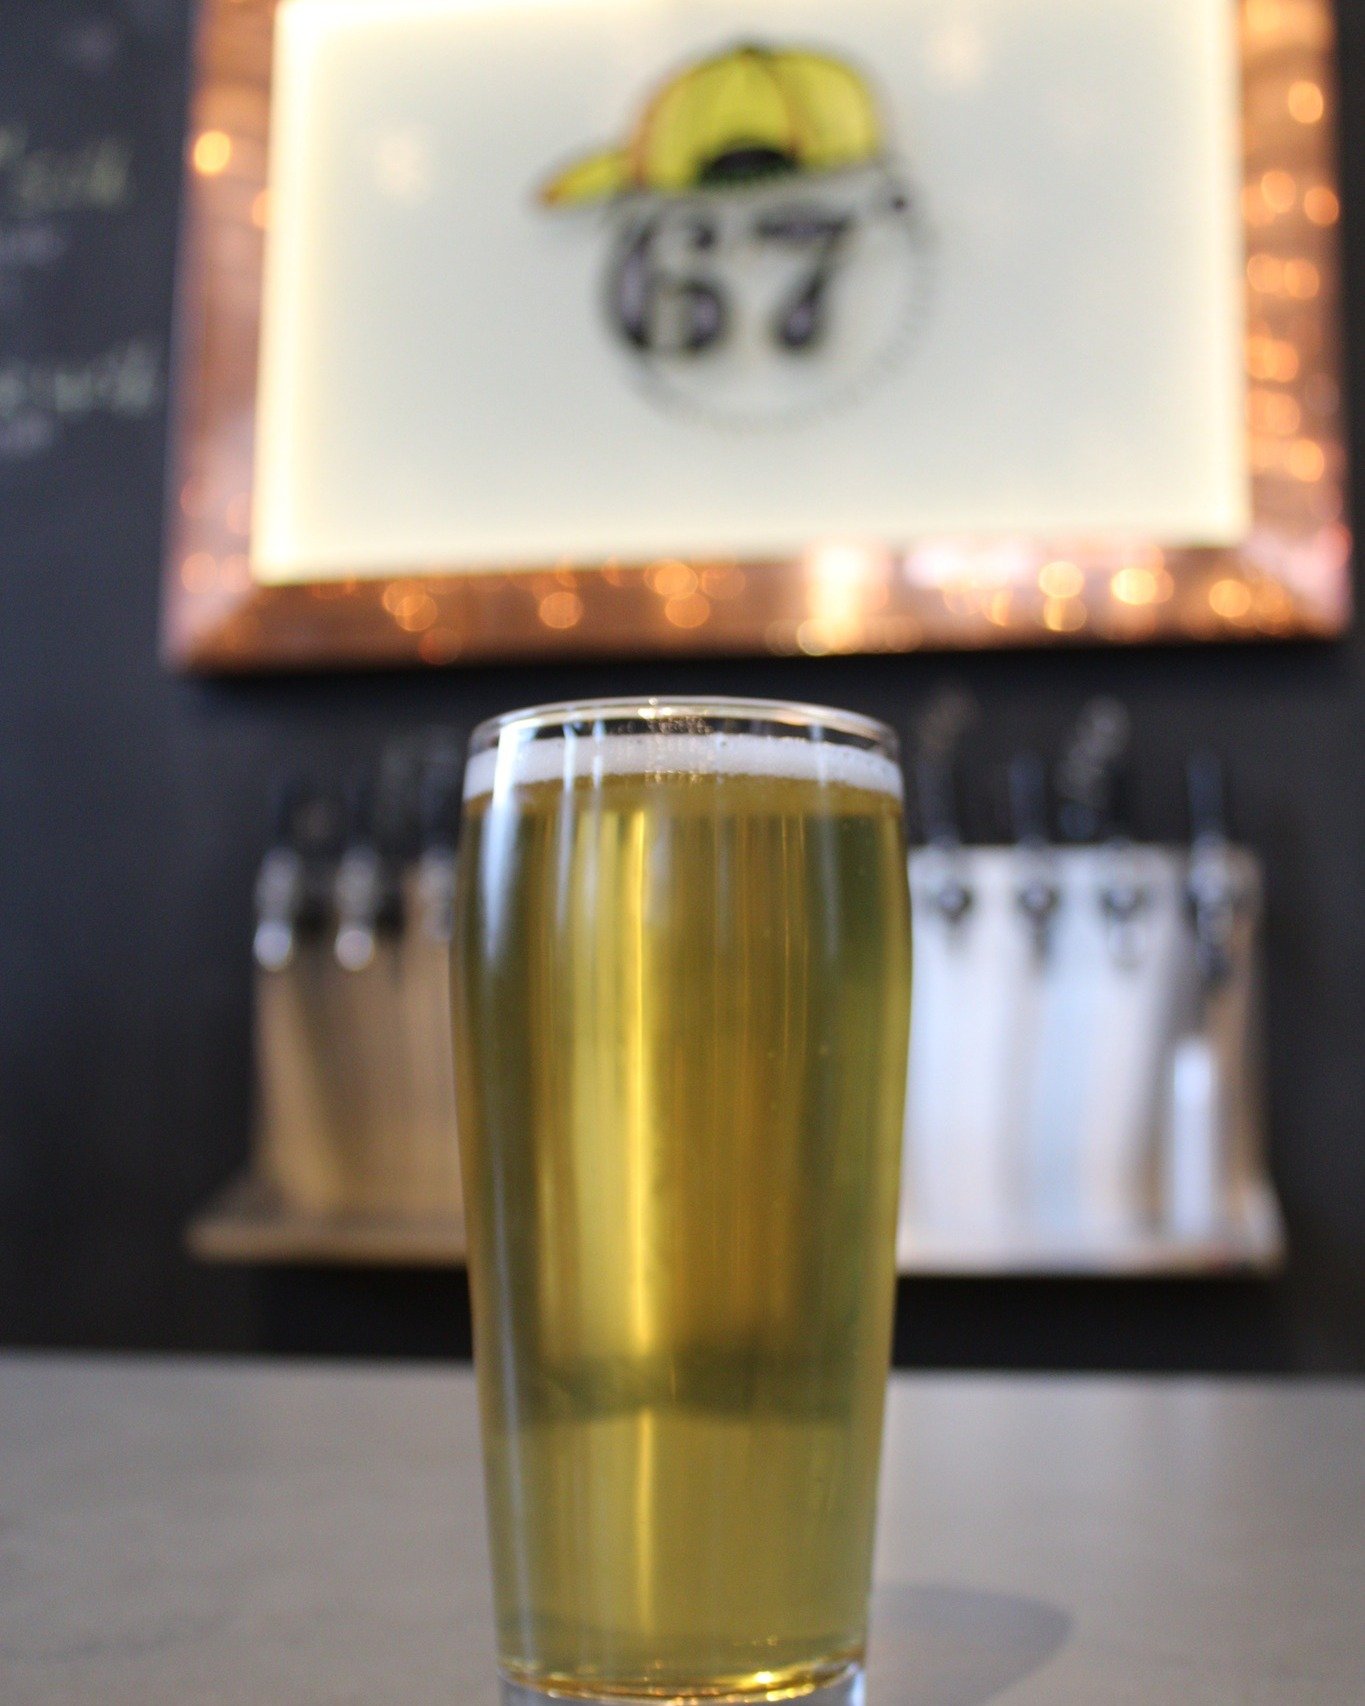 Finish out your week with a delicious beer or wine! 67 Degrees is open TONIGHT ONLY this weekend. We will be closed on Saturday for a private event. Let's meet on Friday for coworking first and then beer! 

#WeekendatTheSubstation #RosLove #Roslindal